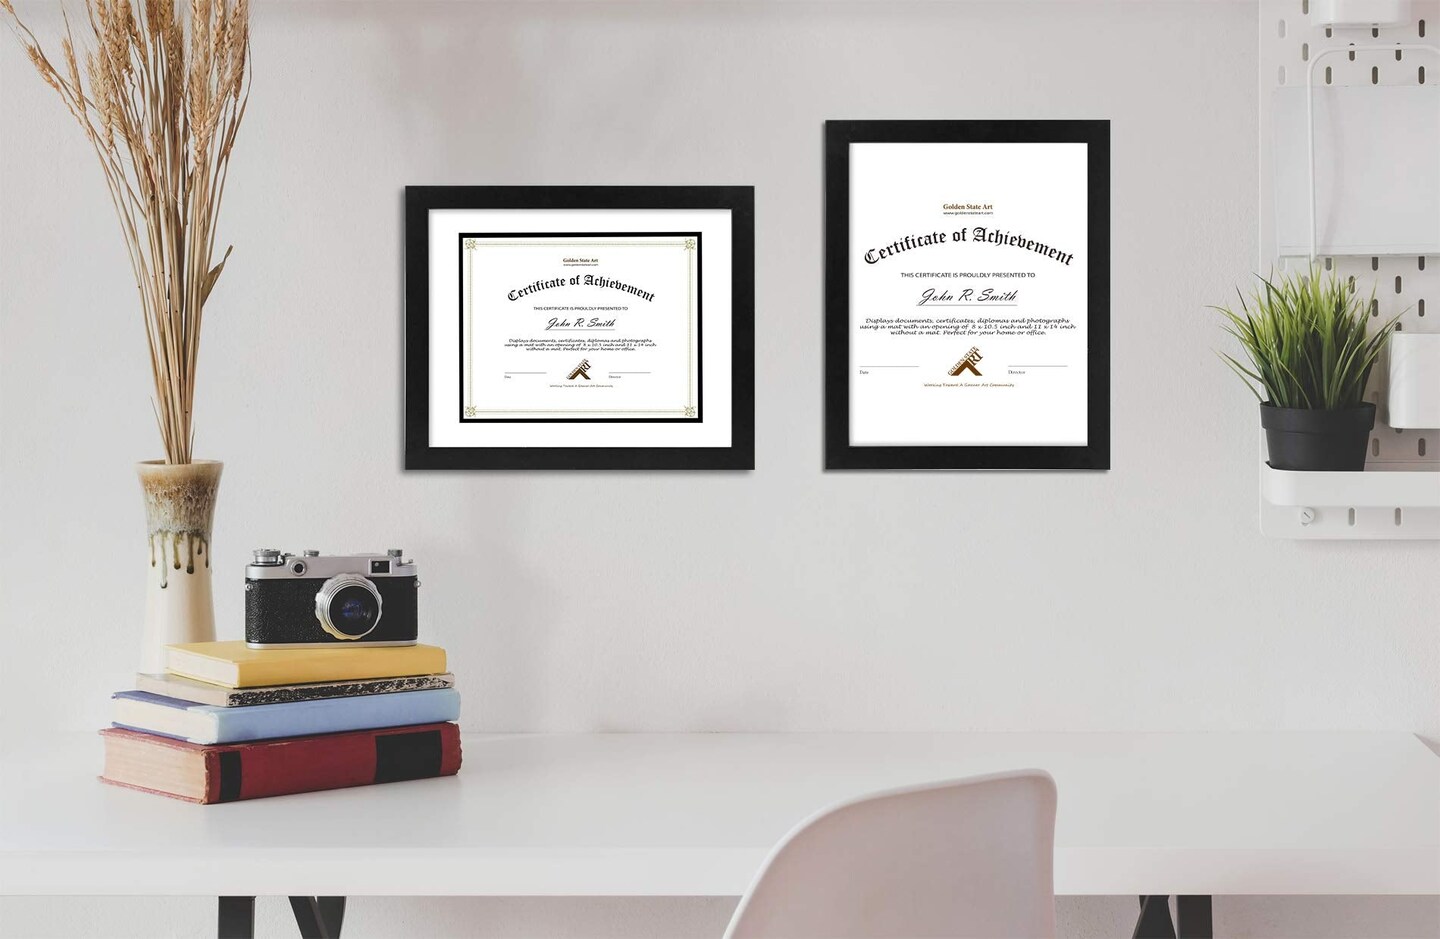 Golden State Art, 11x14 Diploma Frame for 8.5x11 Document &#x26; Certificates with Mat, Or 11x14 Without Mat, Real Glass, Double Mat (Black with White/Black, 1 Pack, Solid Wood)